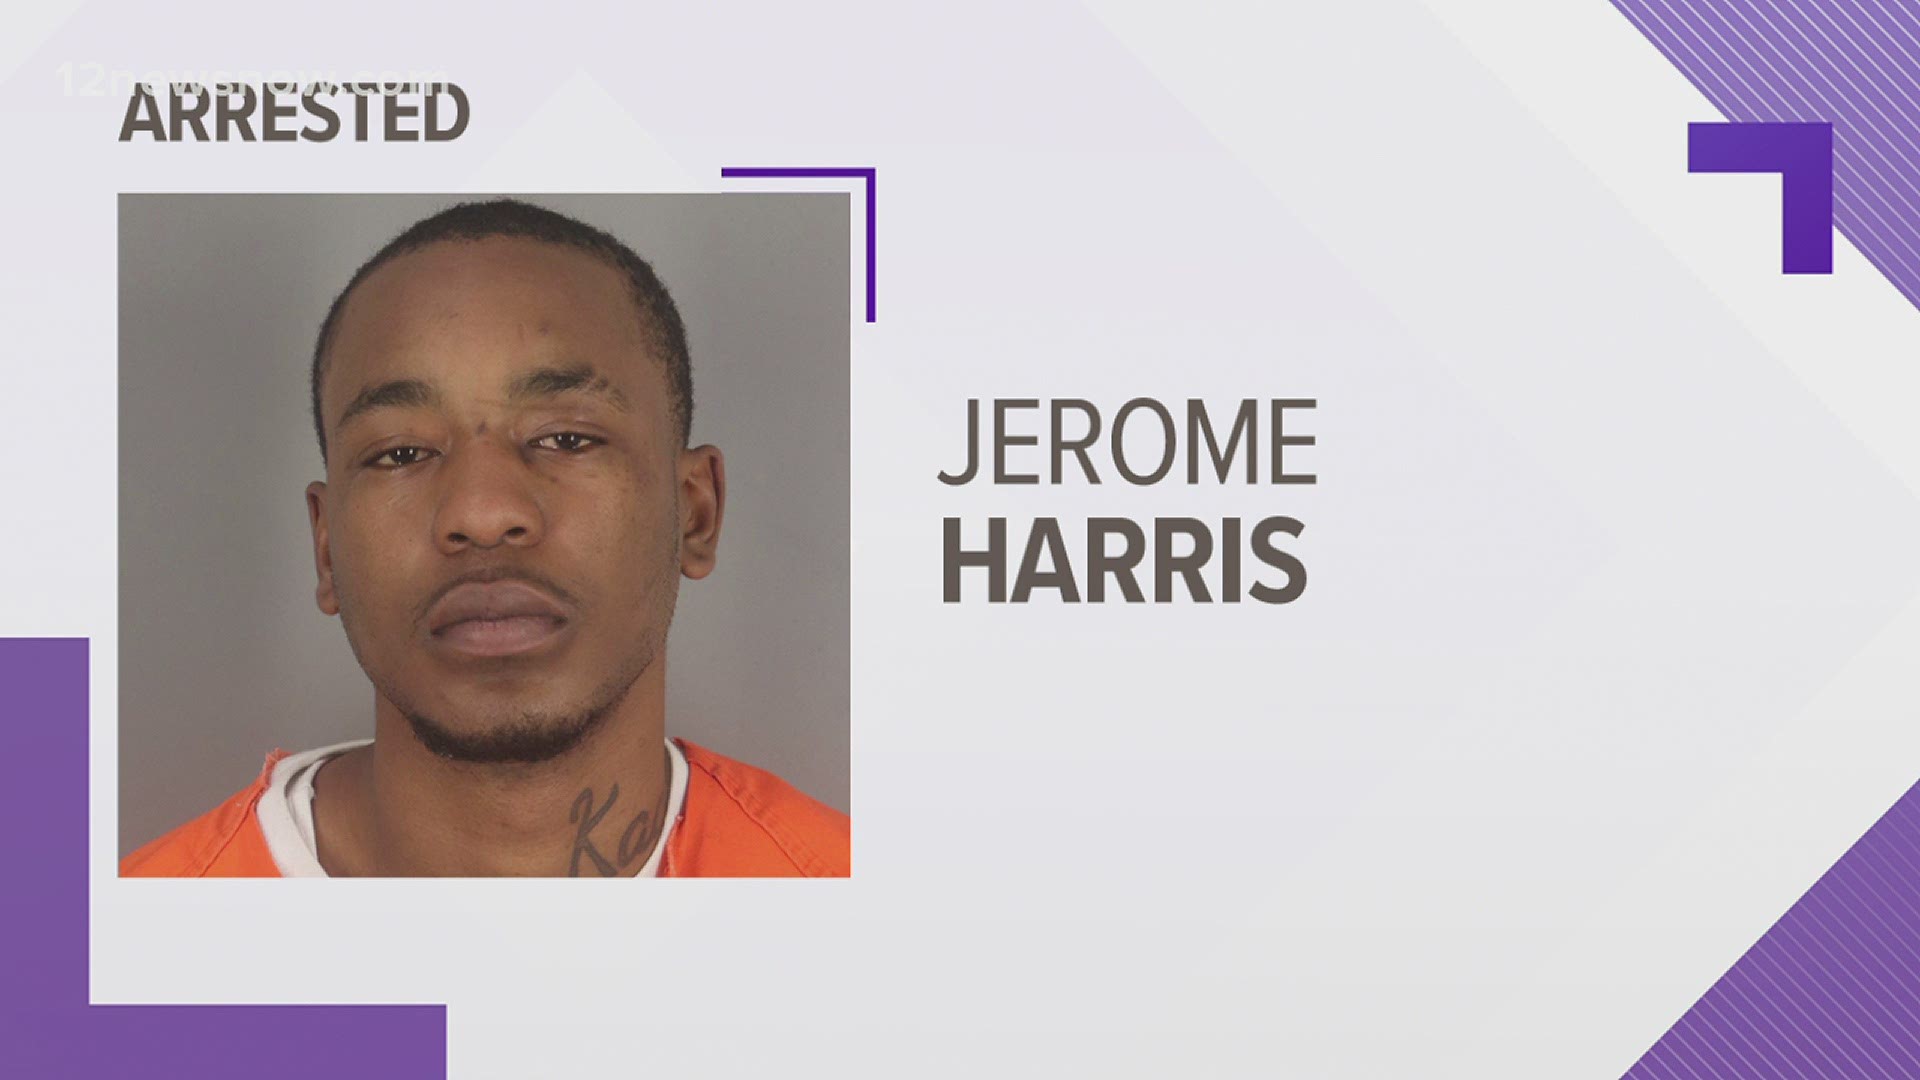 According to court documents, Jerome and two other men broke into the school last weekend.